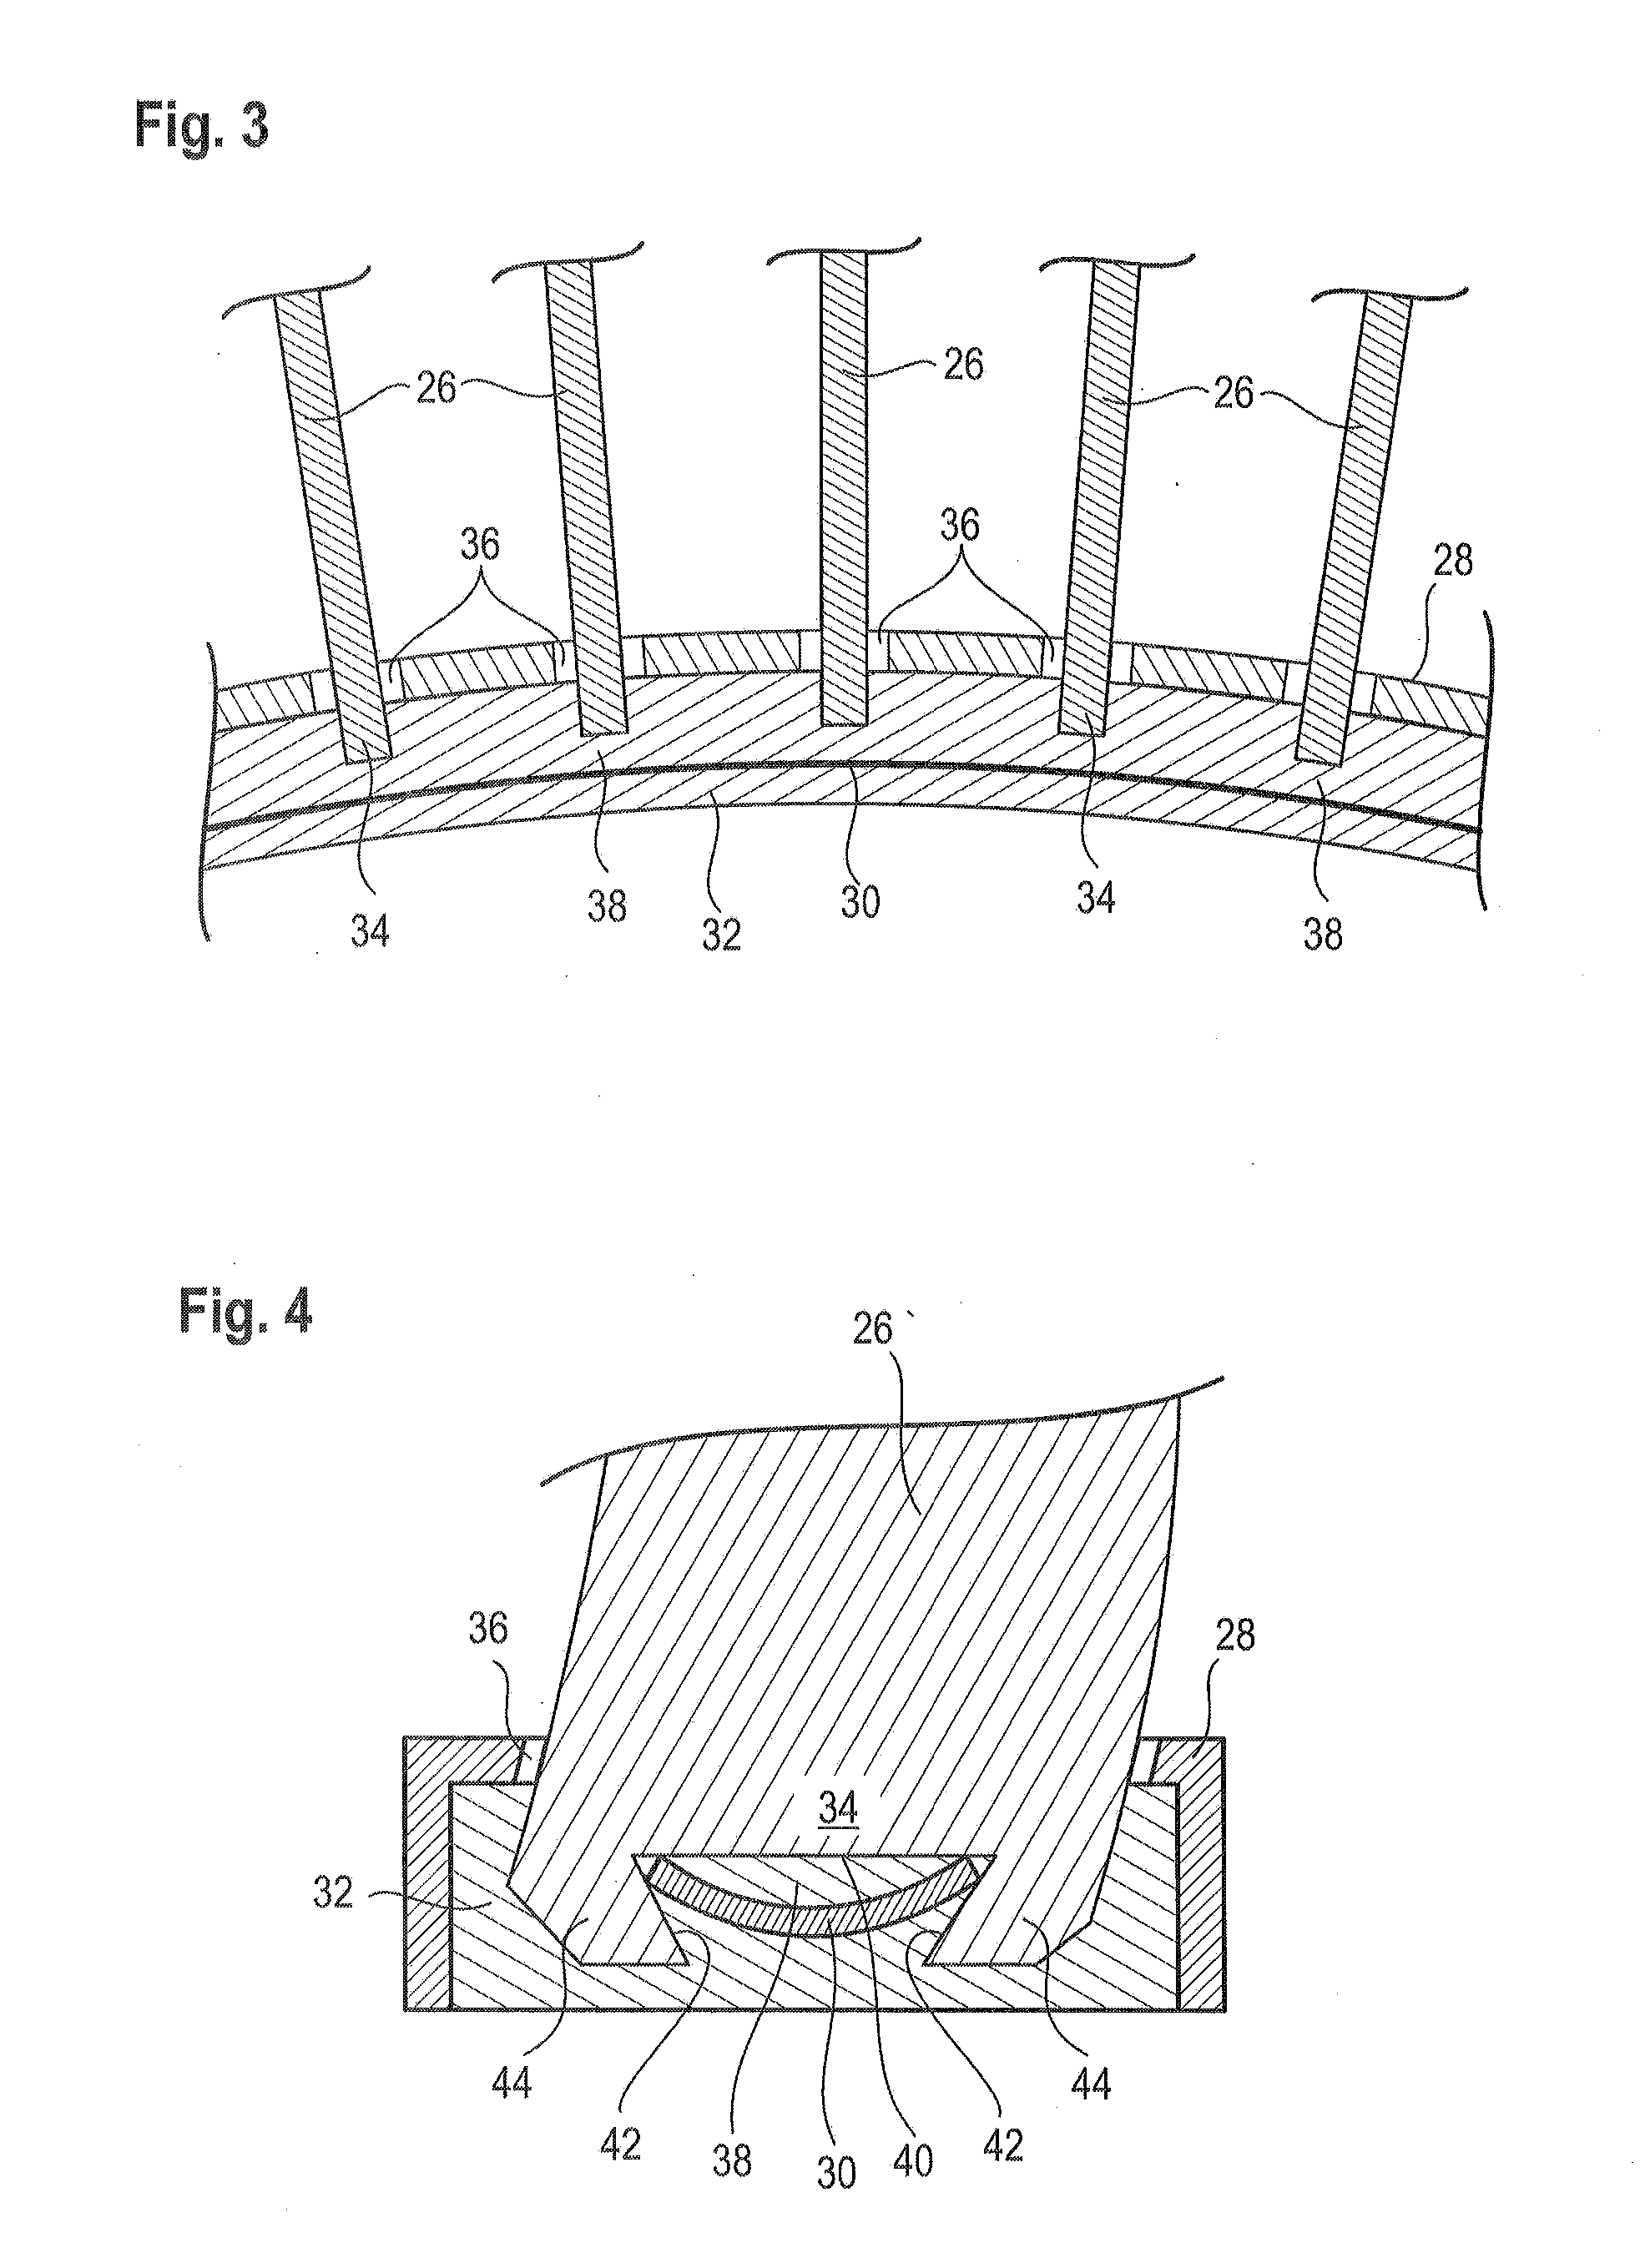 Blade Retaining Ring for an Internal Shroud of an Axial-Flow Turbomachine Compressor